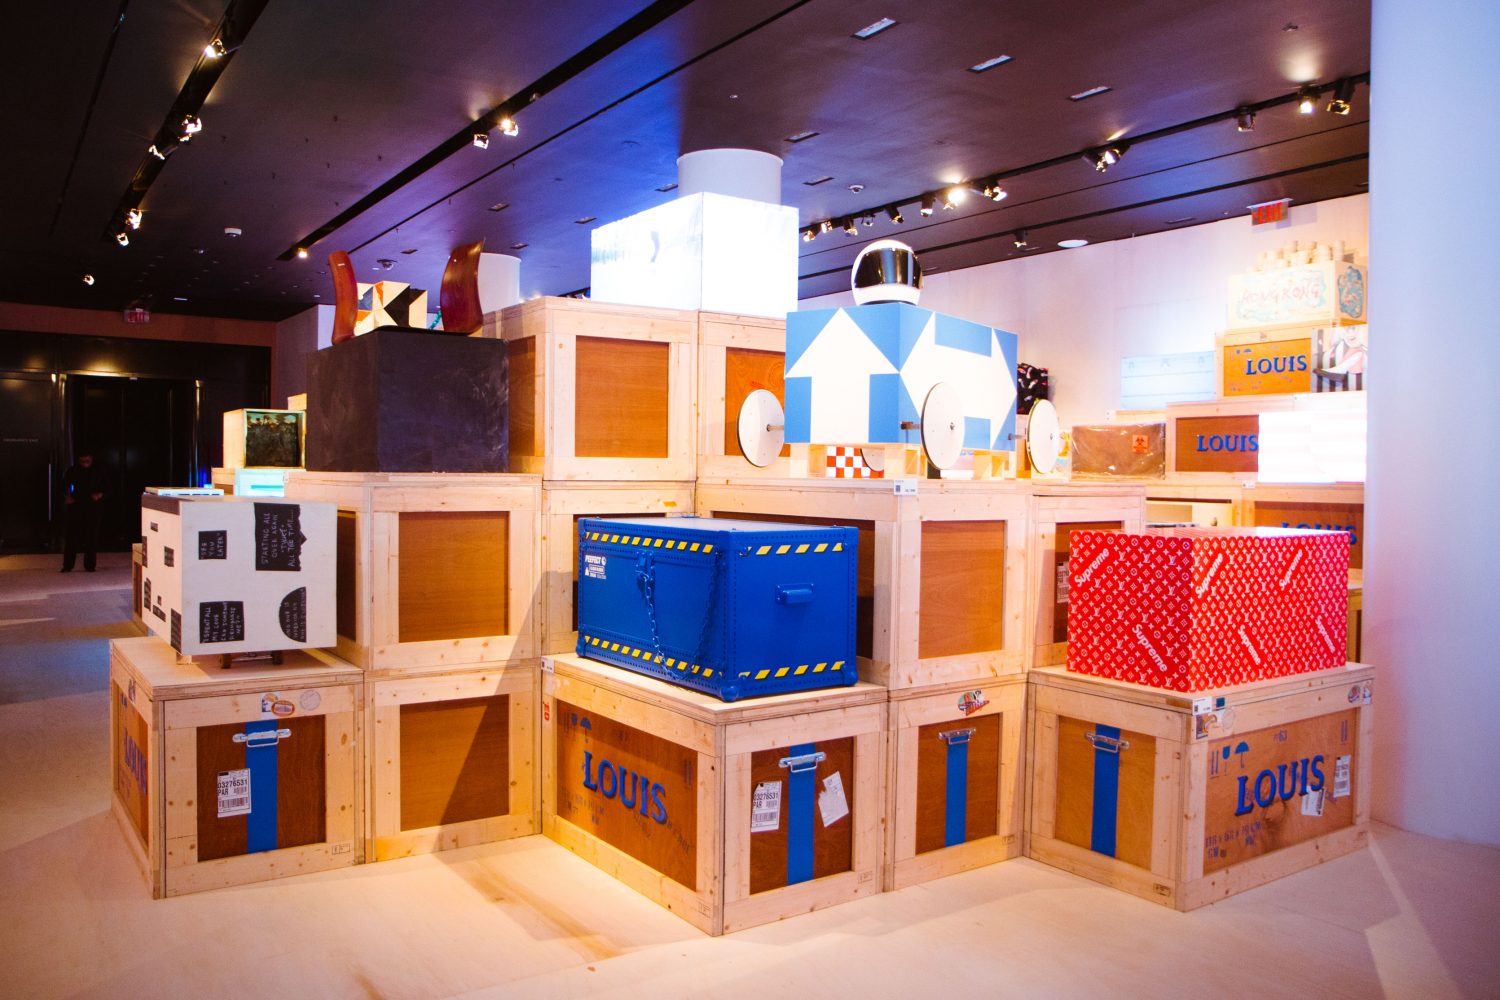 200 TRUNKS, 200 VISIONARIES: THE EXHIBITION” IN NEW YORK